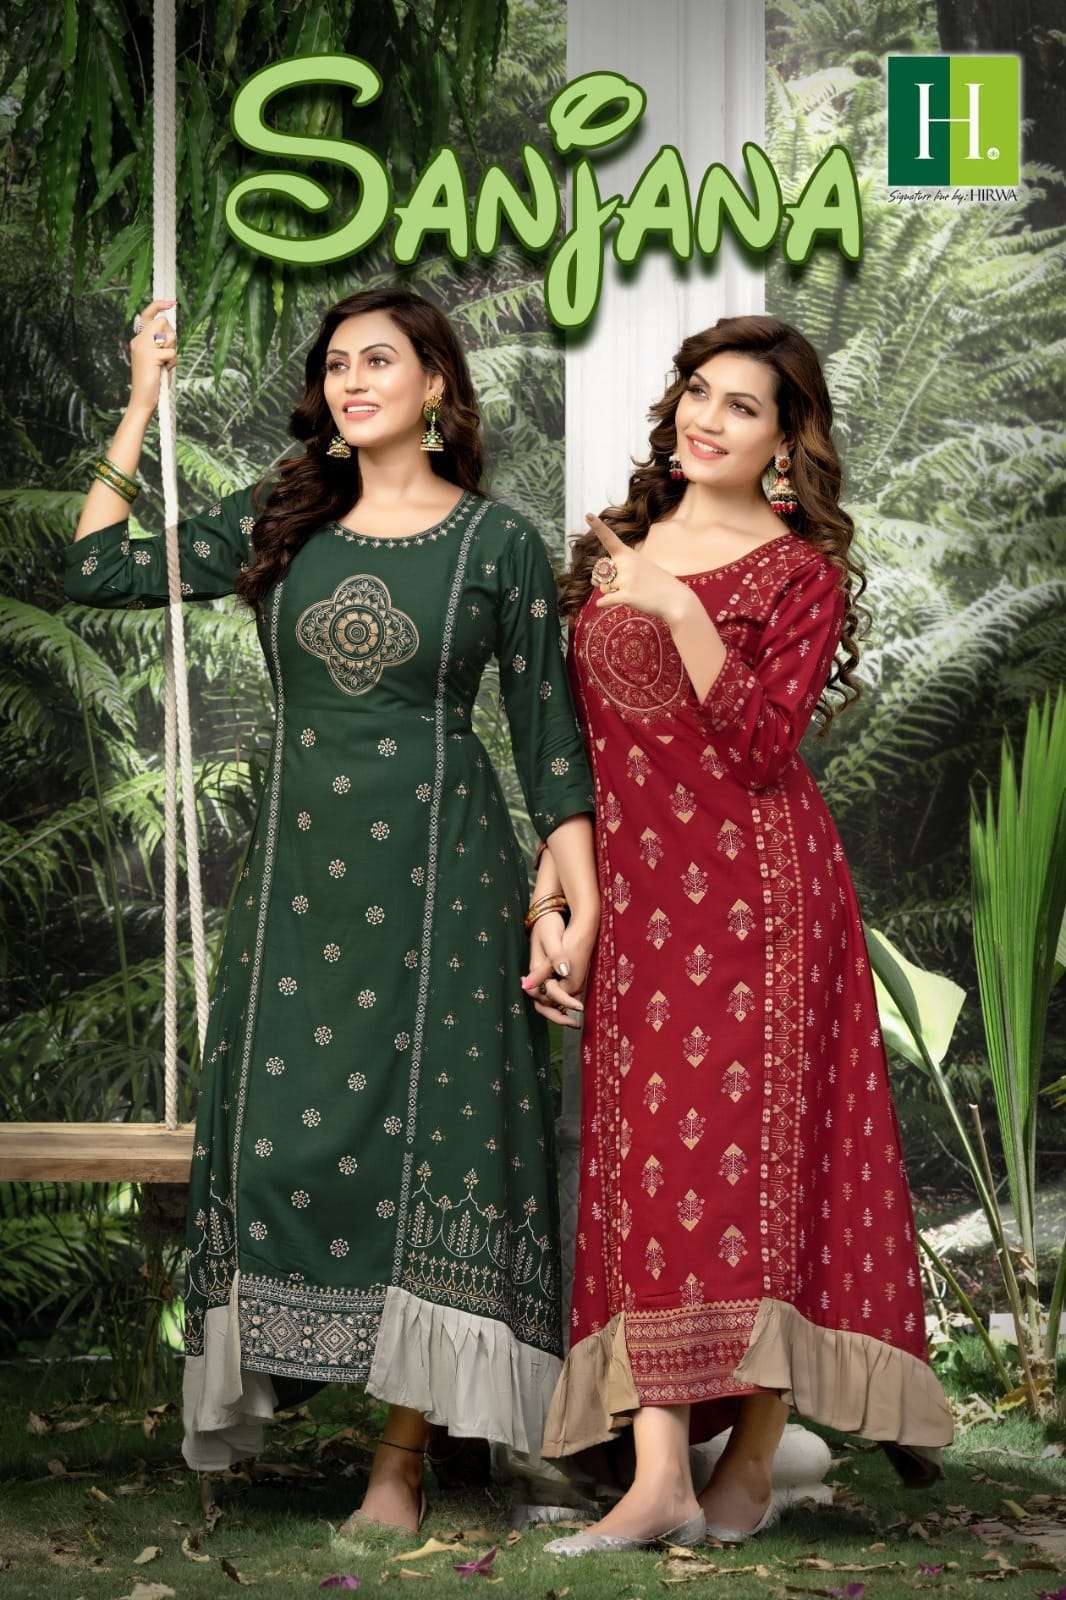 Fashionable kurtis have become the staple and favourite in India | Clasf  fashion